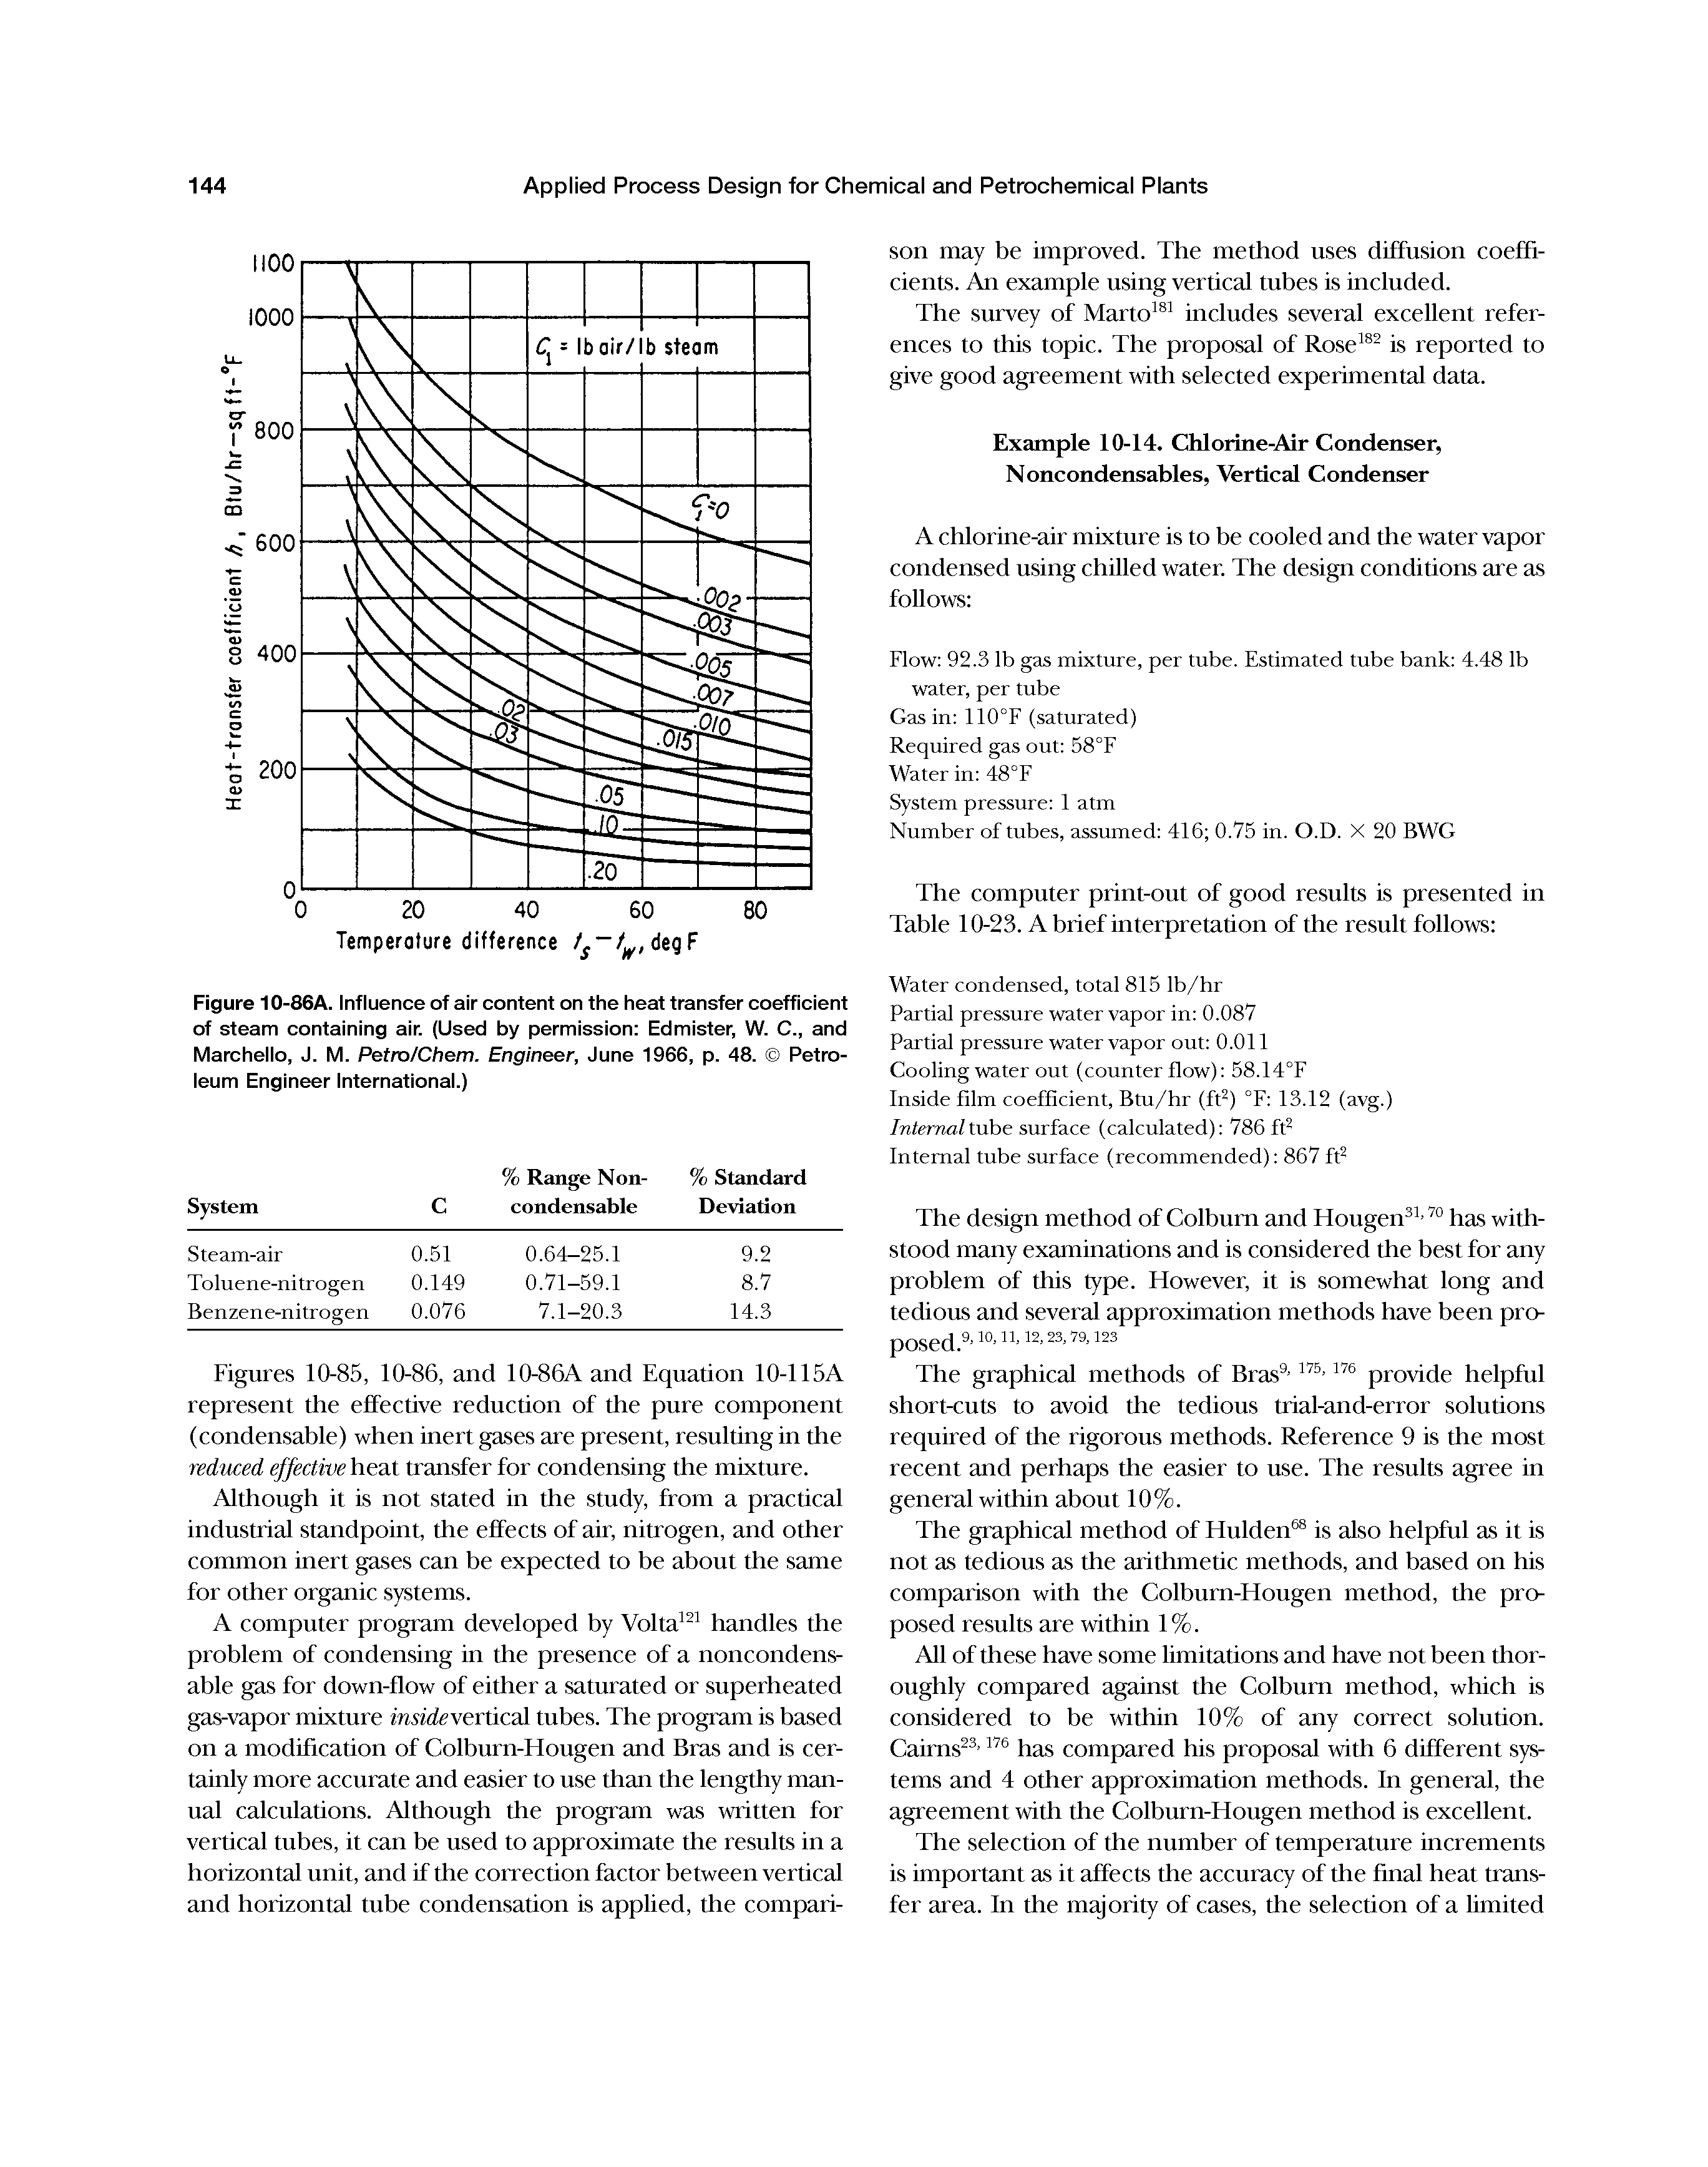 Figure 10-86A. Influence of air content on the heat transfer coefficient of steam containing air. (Used by permission Edmister, W. C., and Marchello, J. M. Petro/Chem. Engineer, June 1966, p. 48. Petroleum Engineer International.)...